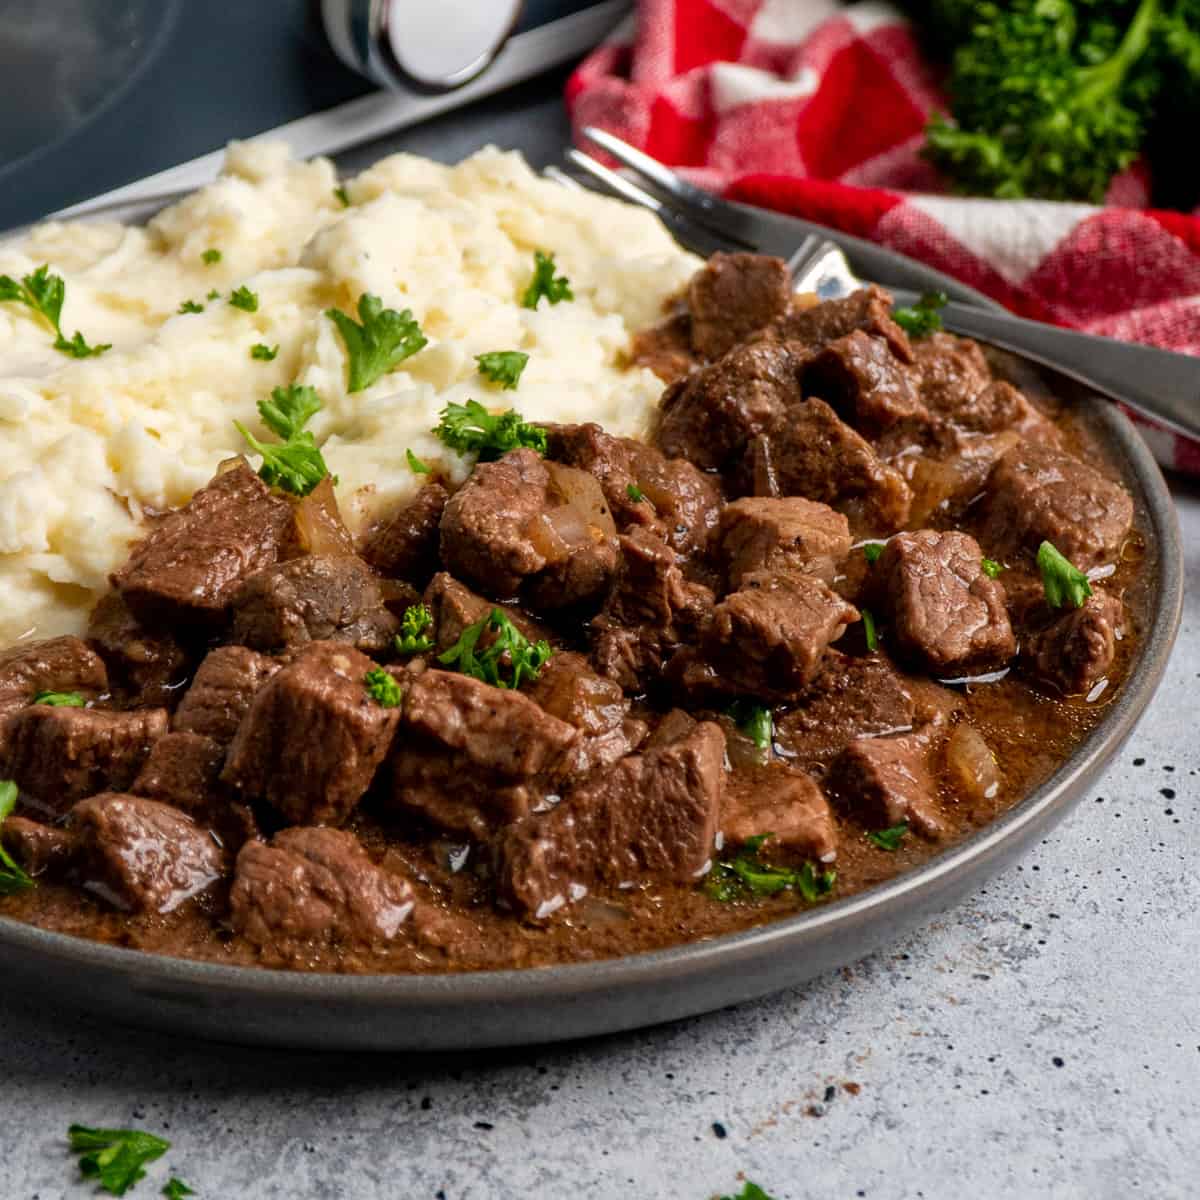 Steak bites on a plate with mashed potatoes.